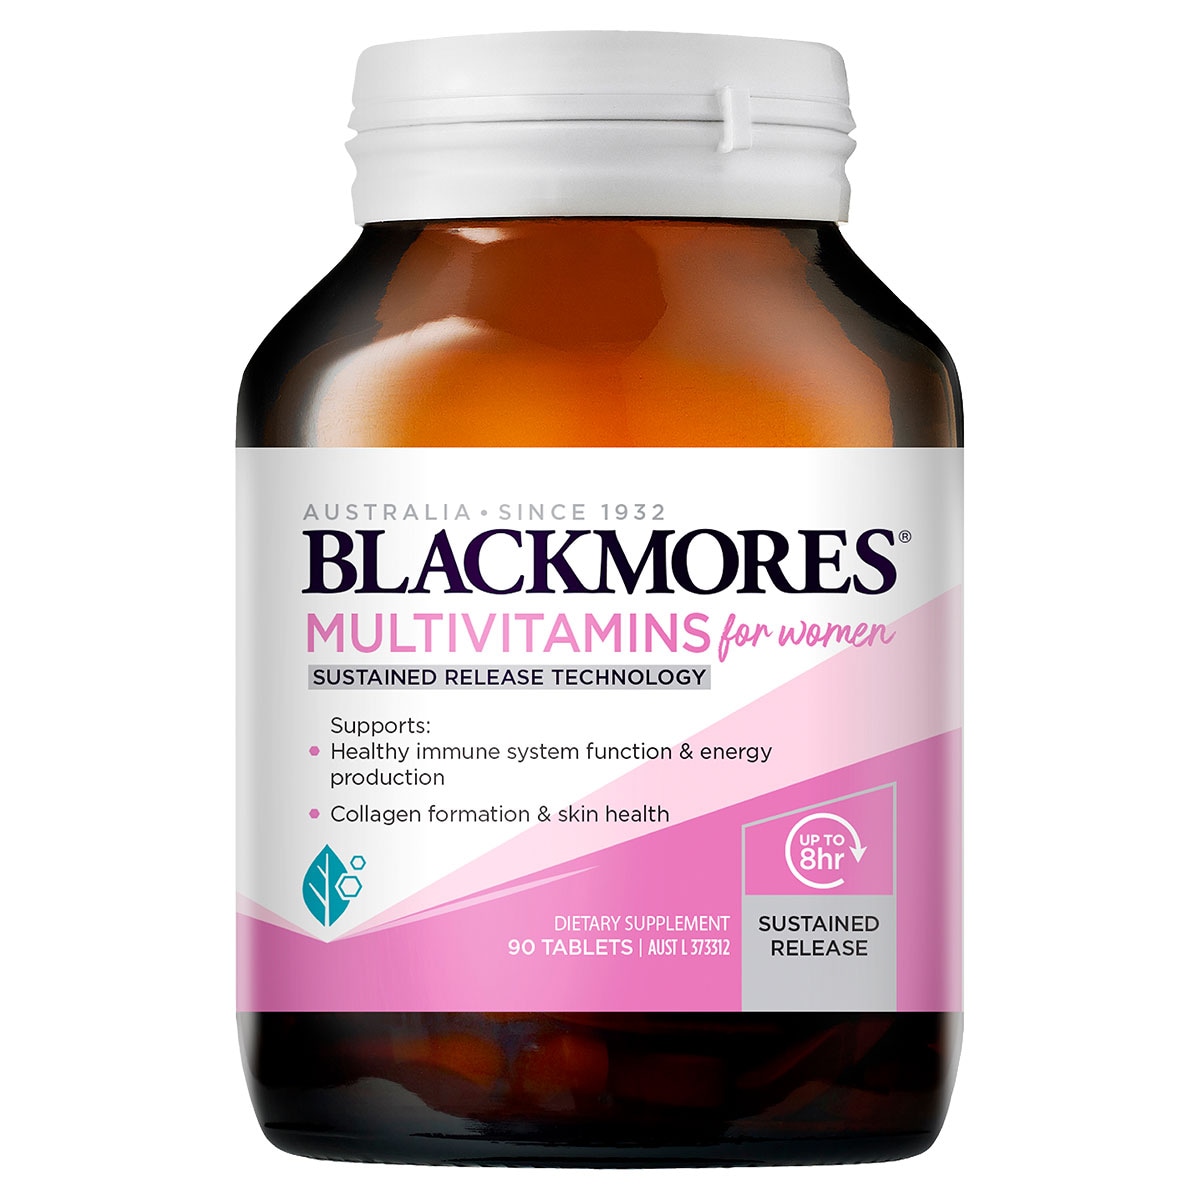 Blackmores Sustained Release Multivitamins for Women 90 Tablets